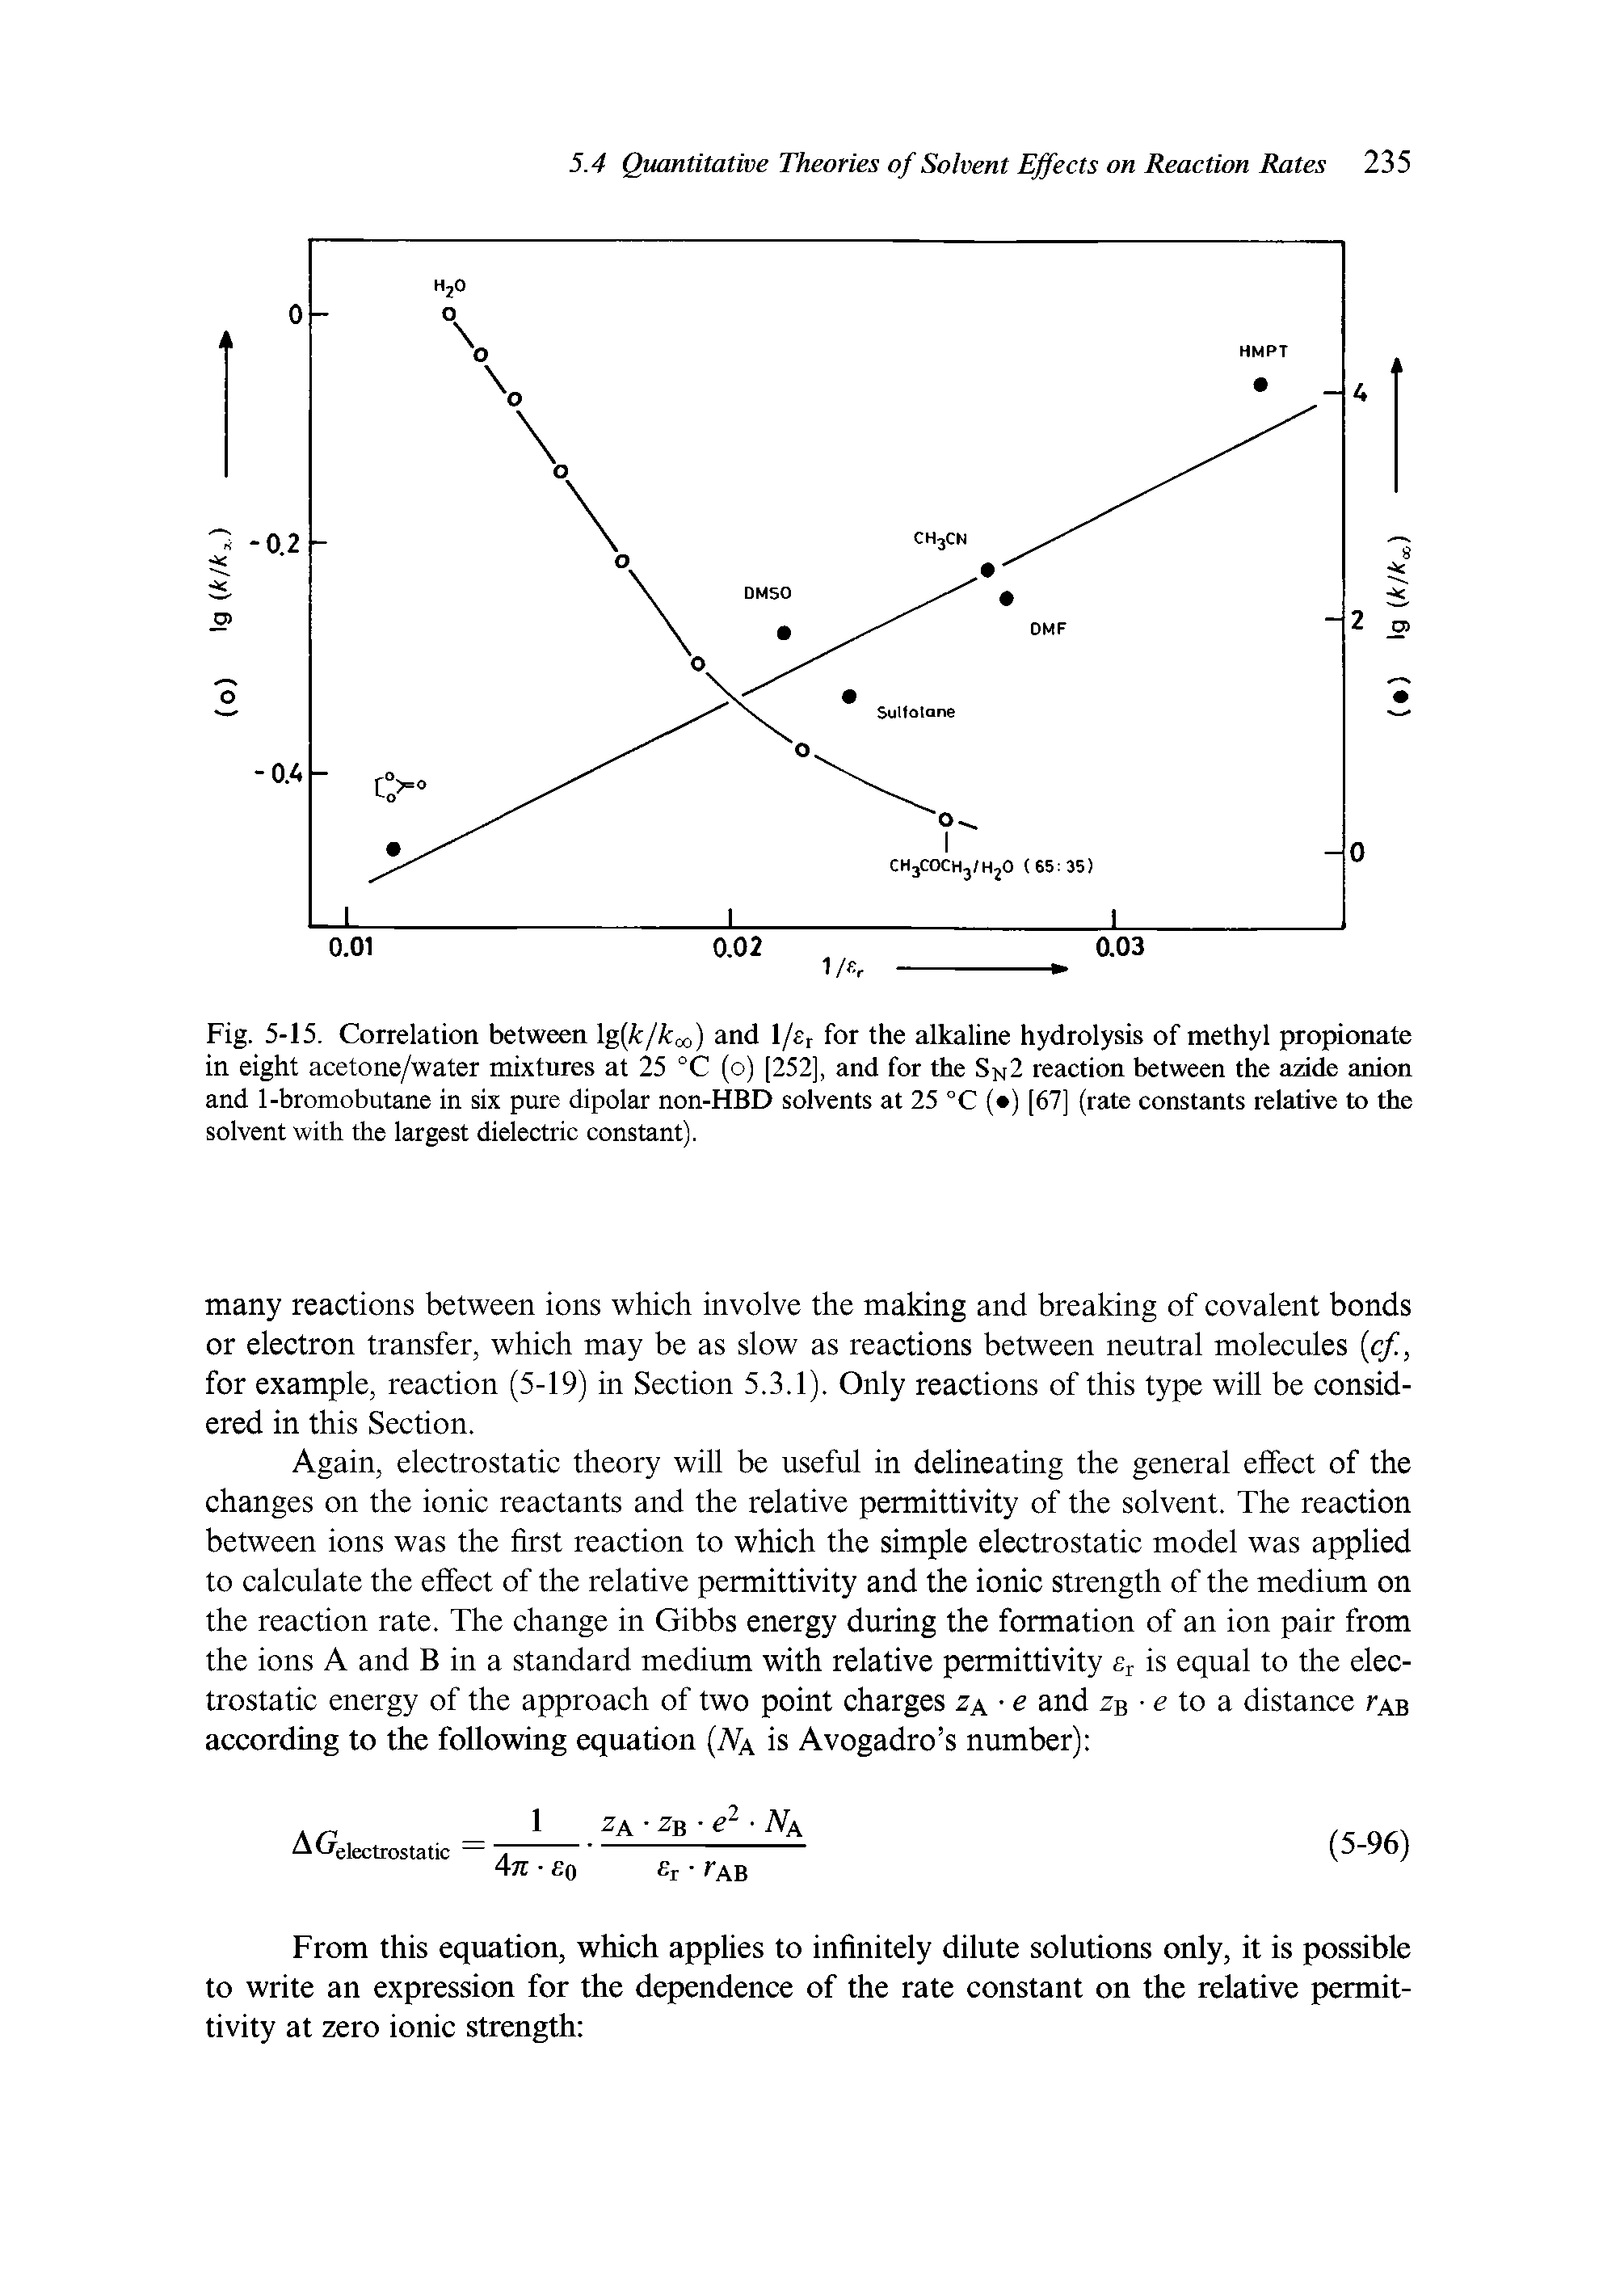 Fig. 5-15. Correlation between g[k/krx,) and 1/sr for the alkaline hydrolysis of methyl propionate in eight acetone/water mixtures at 25 °C (o) [252], and for the Sn2 reaction between the azide anion and 1-bromobutane in six pure dipolar non-HBD solvents at 25 °C ( ) [67] (rate constants relative to the solvent with the largest dielectric constant).